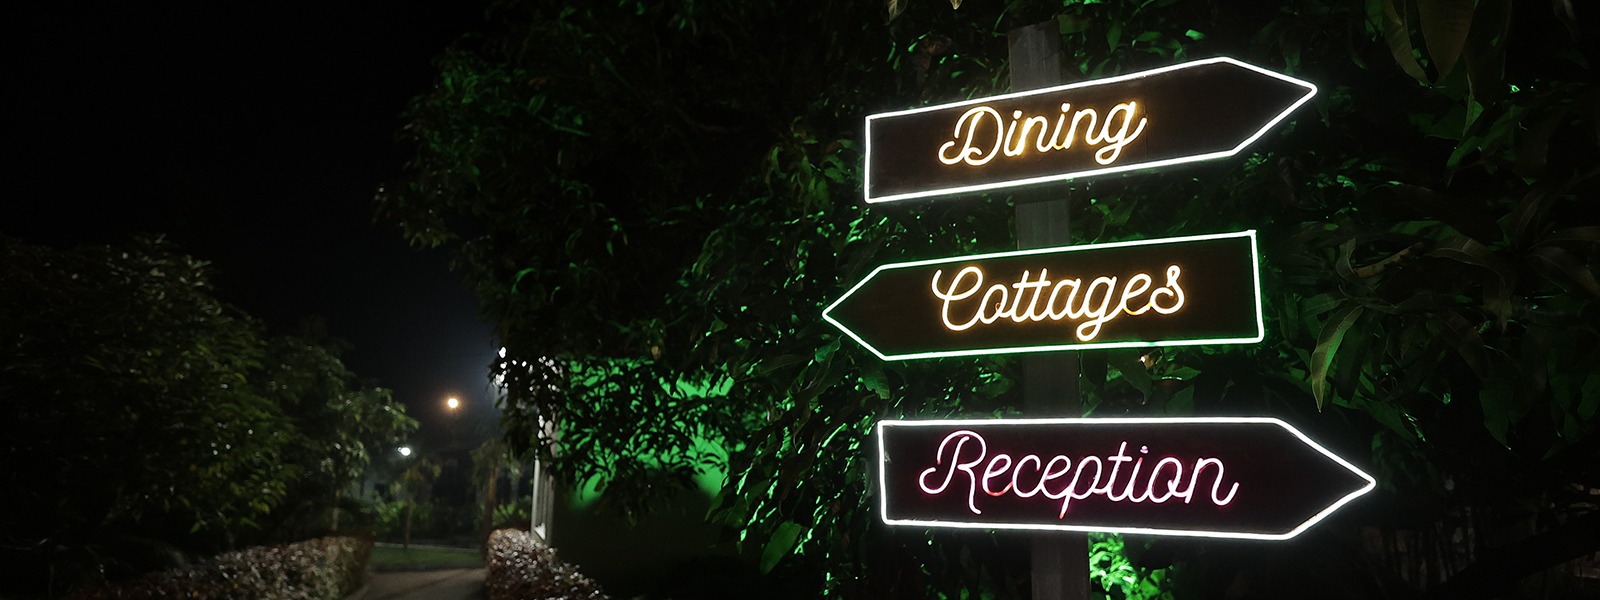 Dining - Cottages - Reception Board